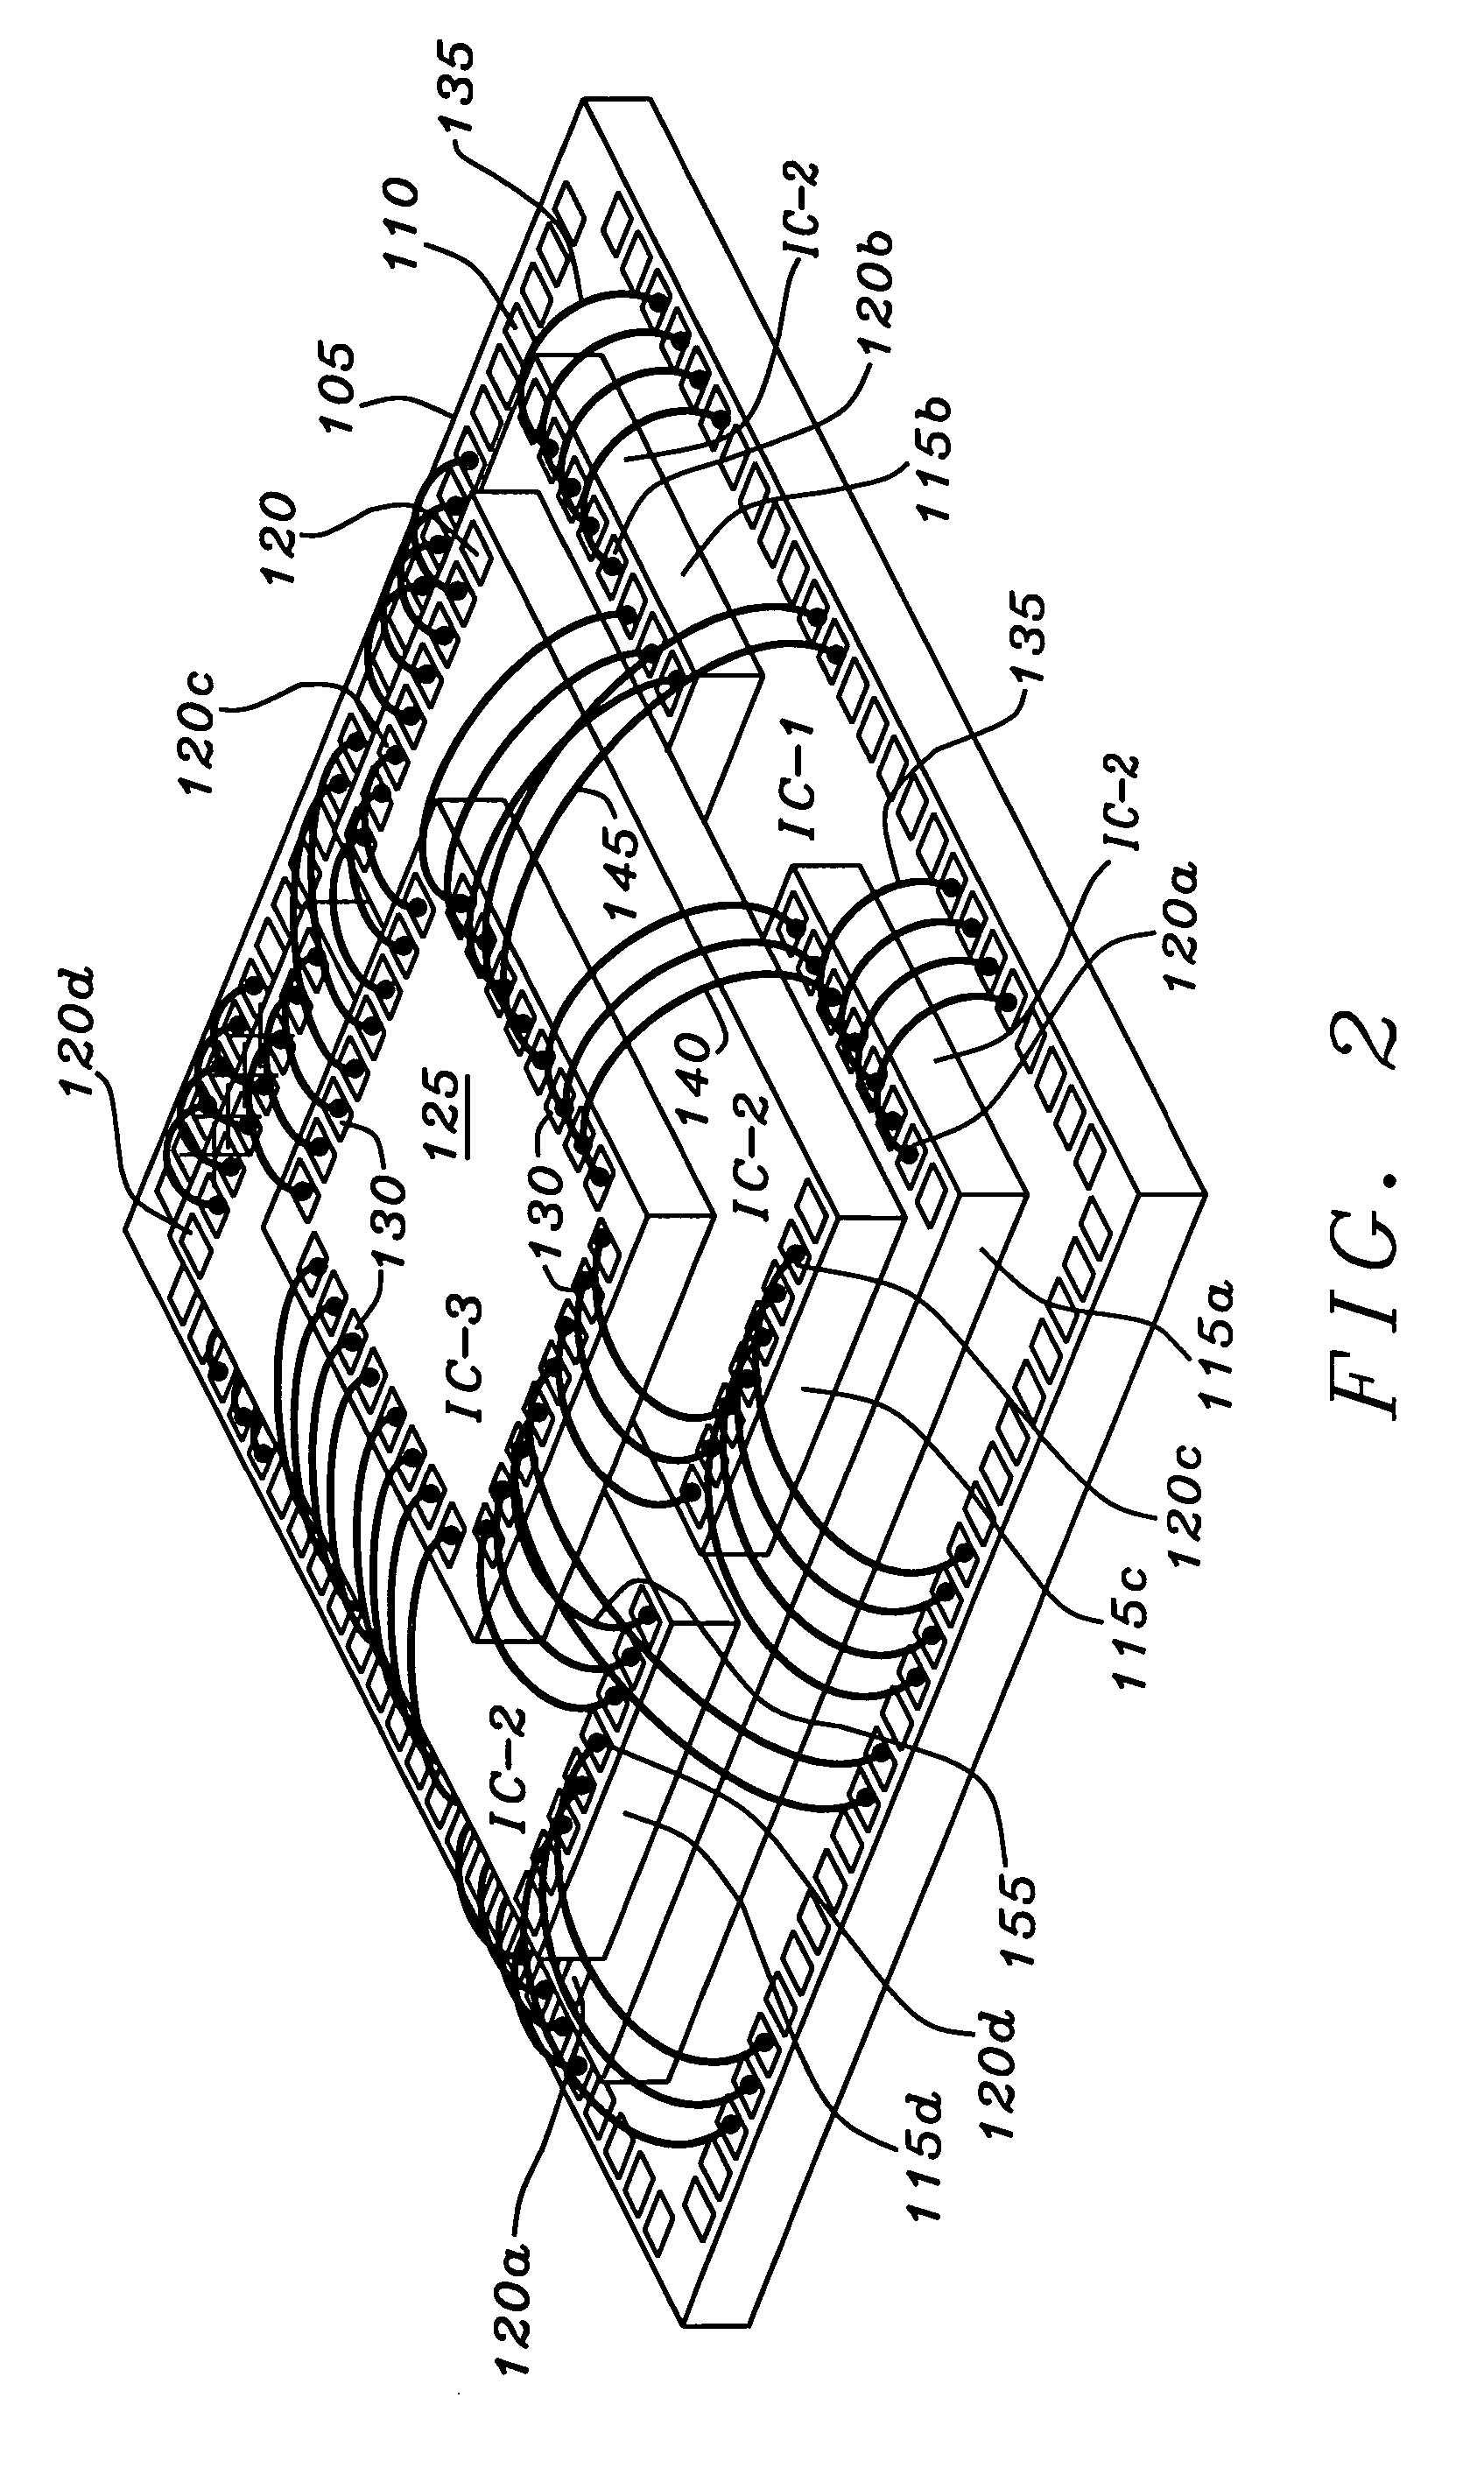 Stacked multiple integrated circuit die package assembly